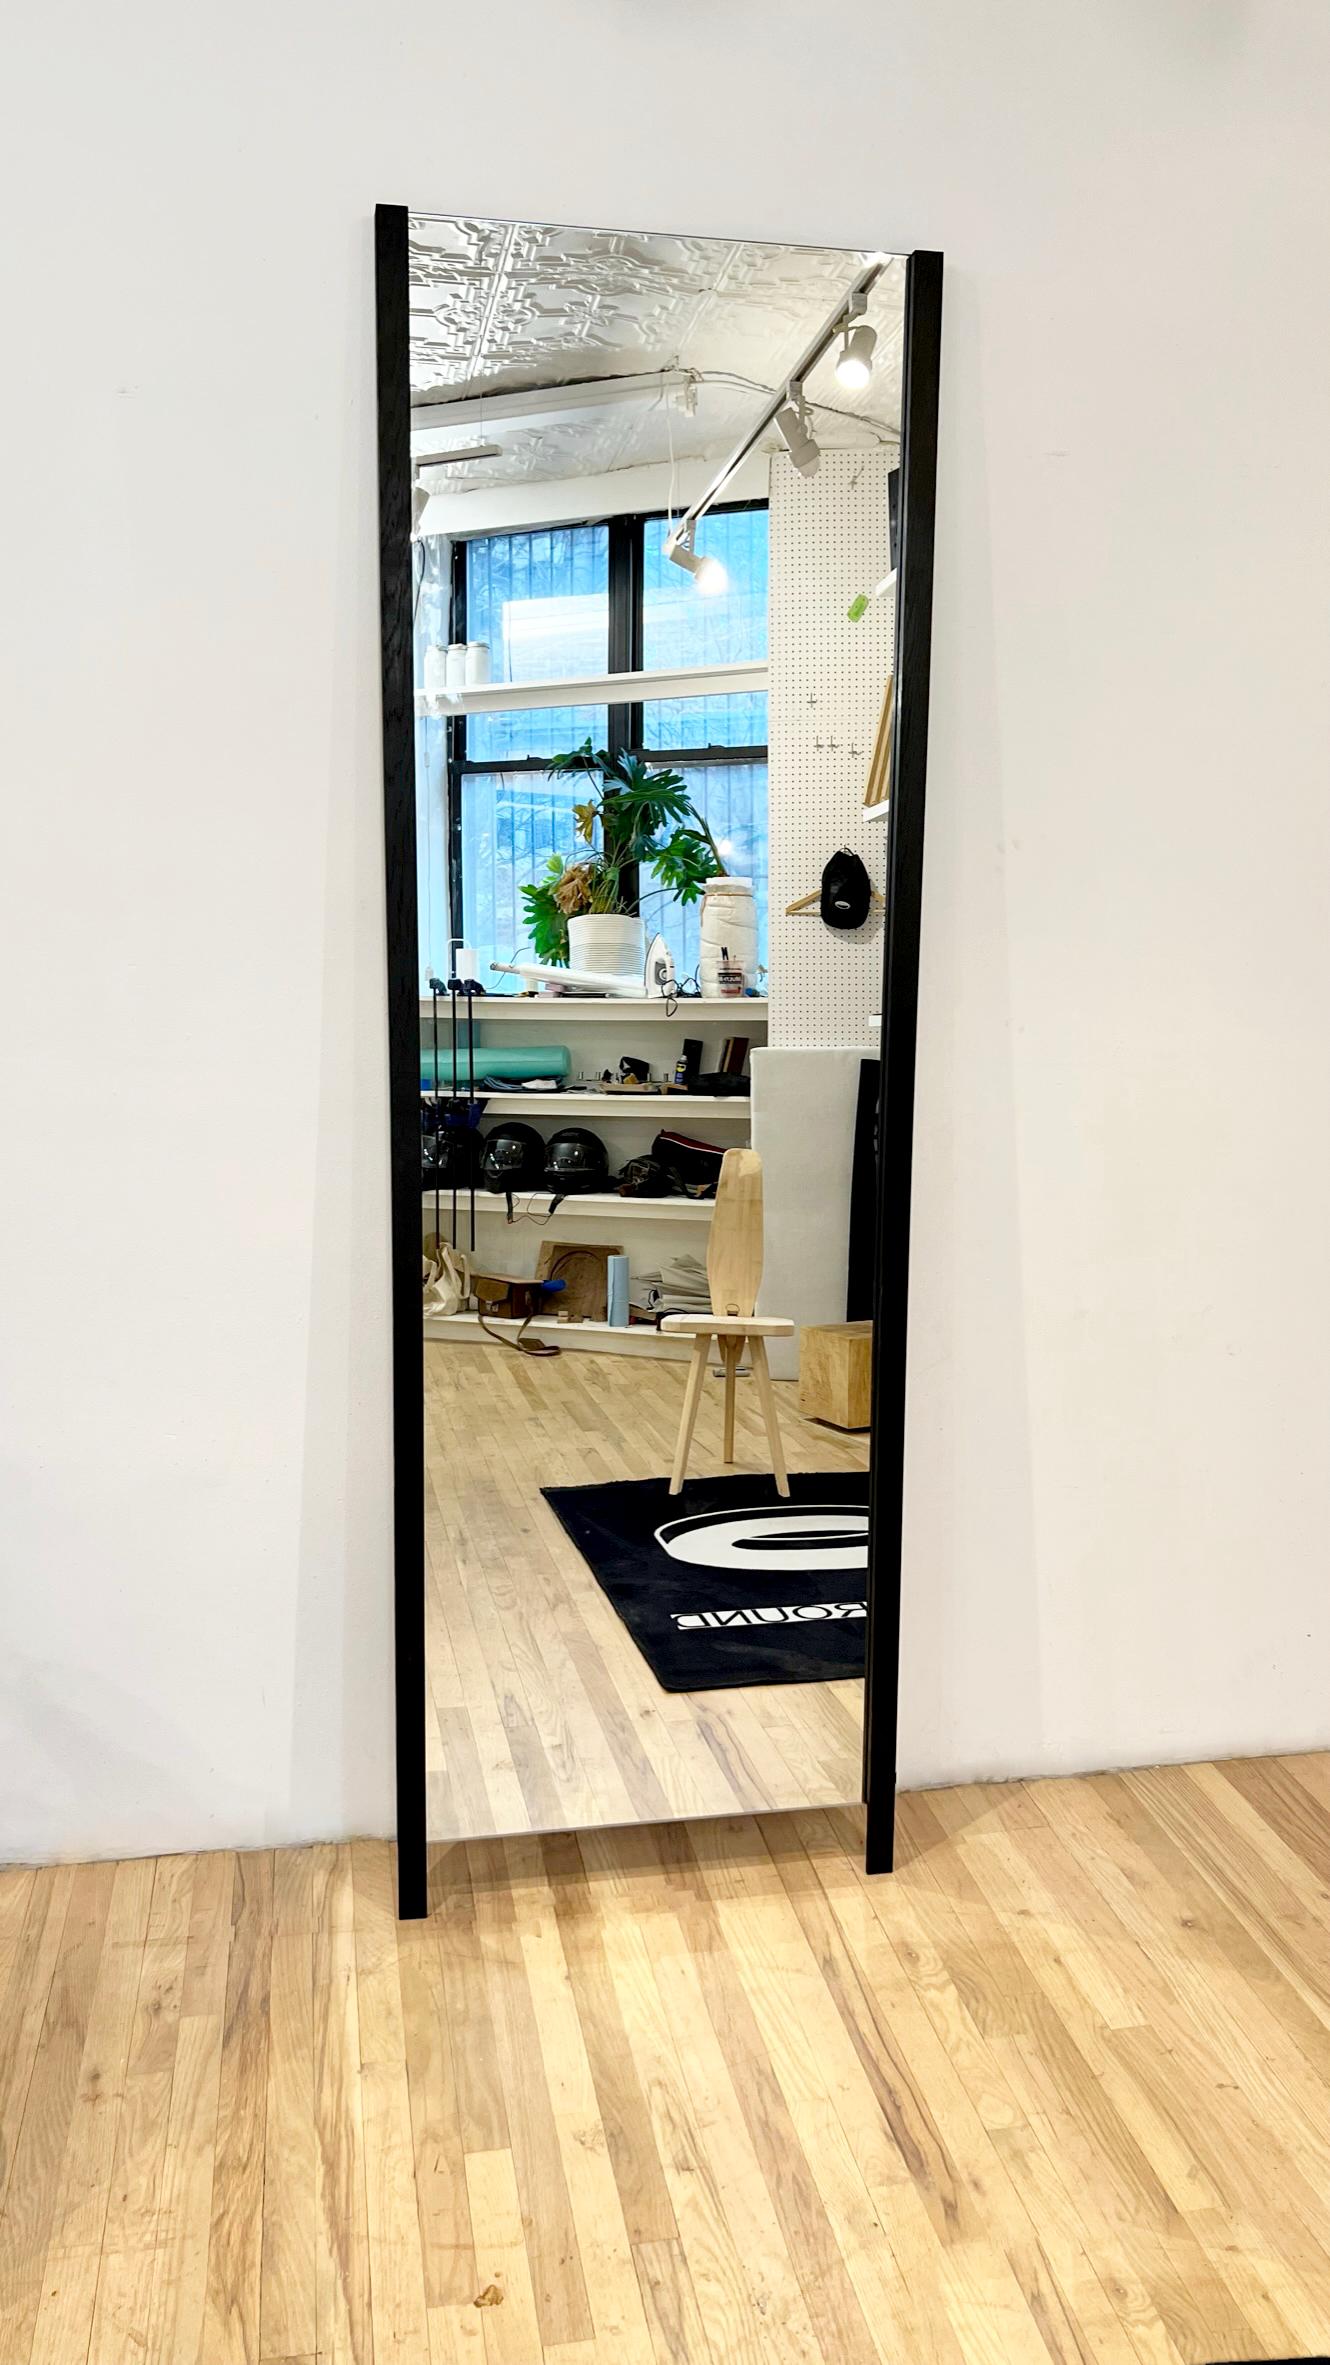 Constructed from black walnut the mirror is a portal to another universe. The Crura mirror extends the floor in an infinite illusion. Standing on two legs it doubles space and stands at your favorite wall for the creation of the day's outfit. The